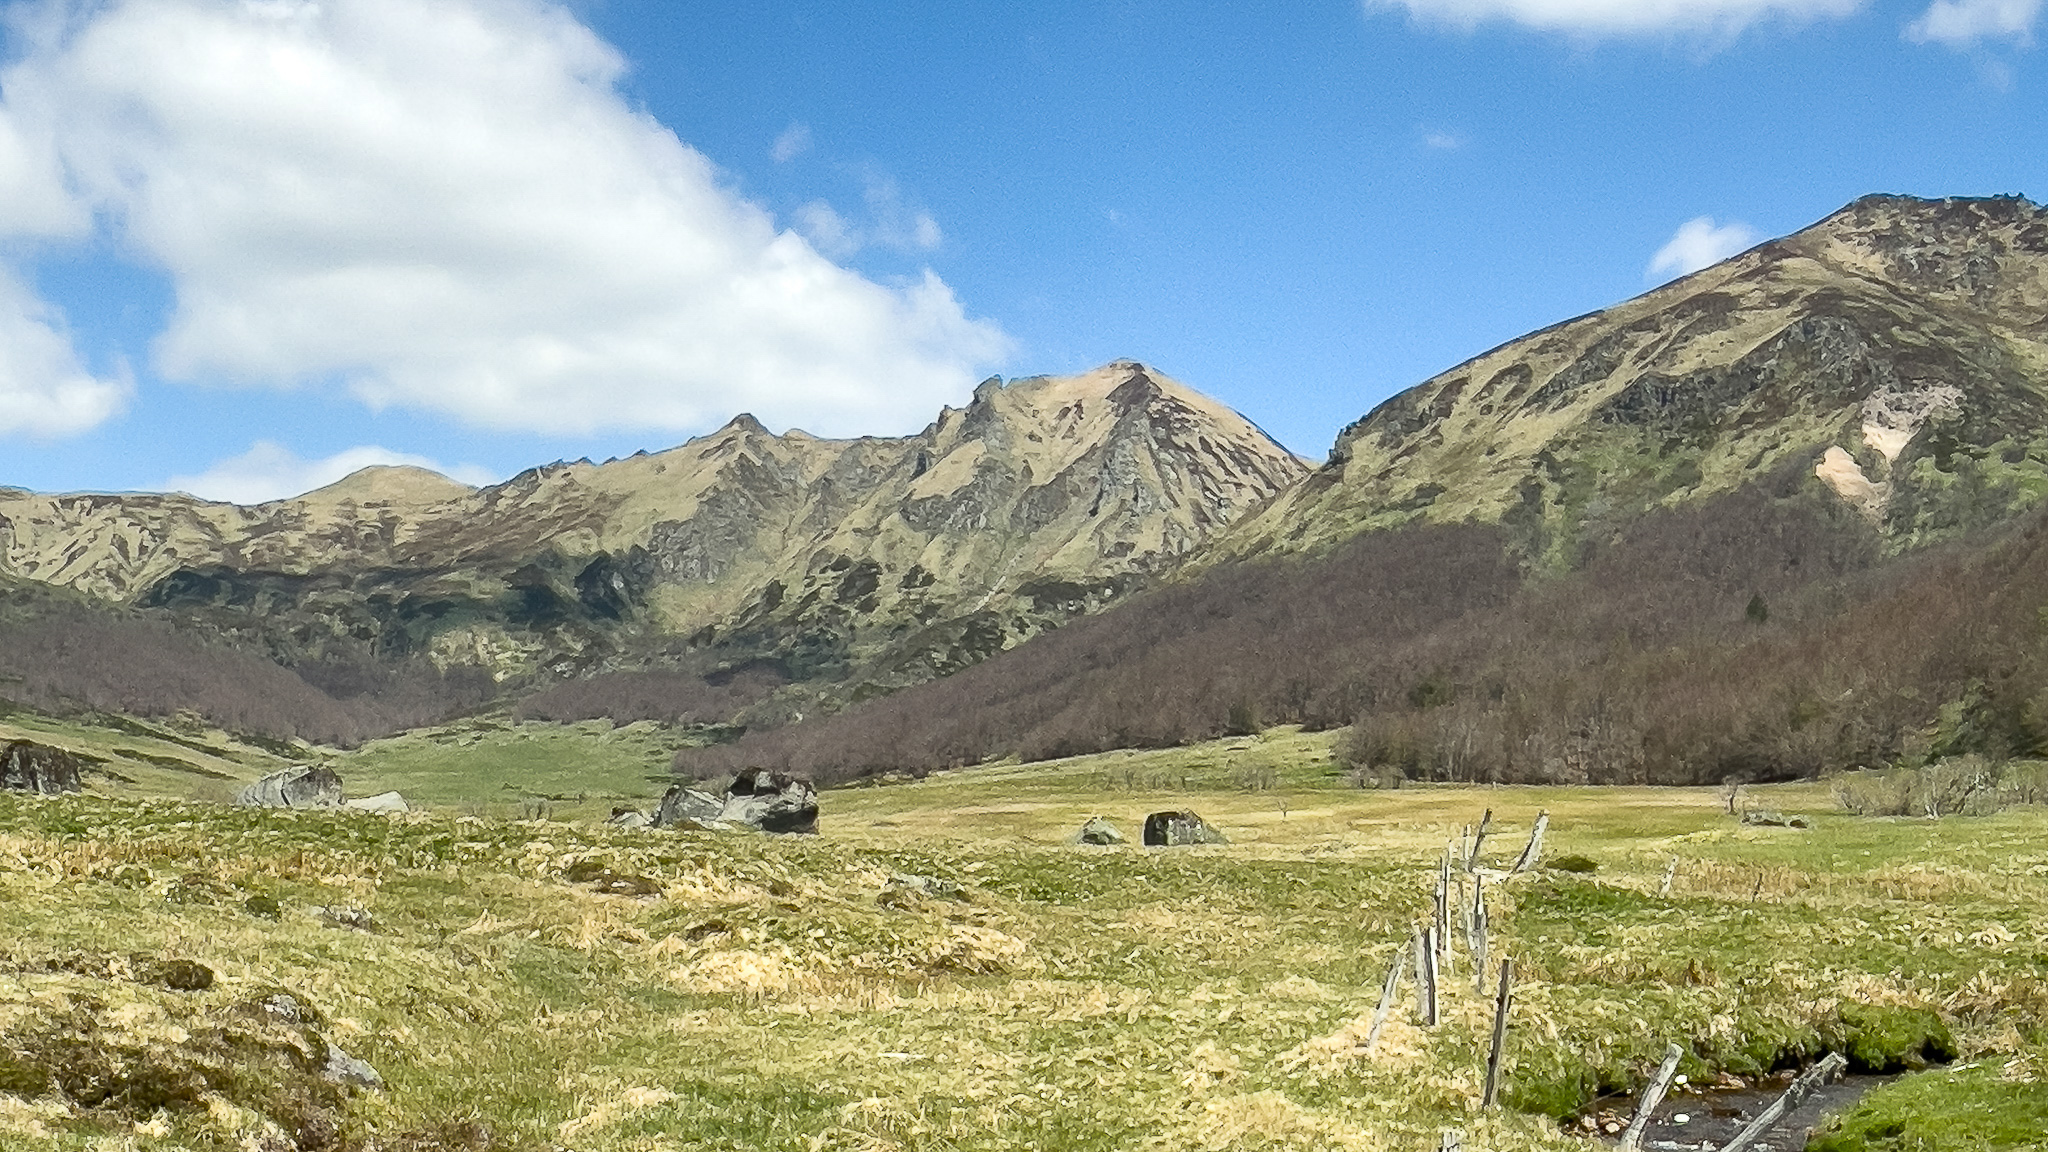 The peaks of the Massif du Sancy bordering the Valley of the Fontaine Salée